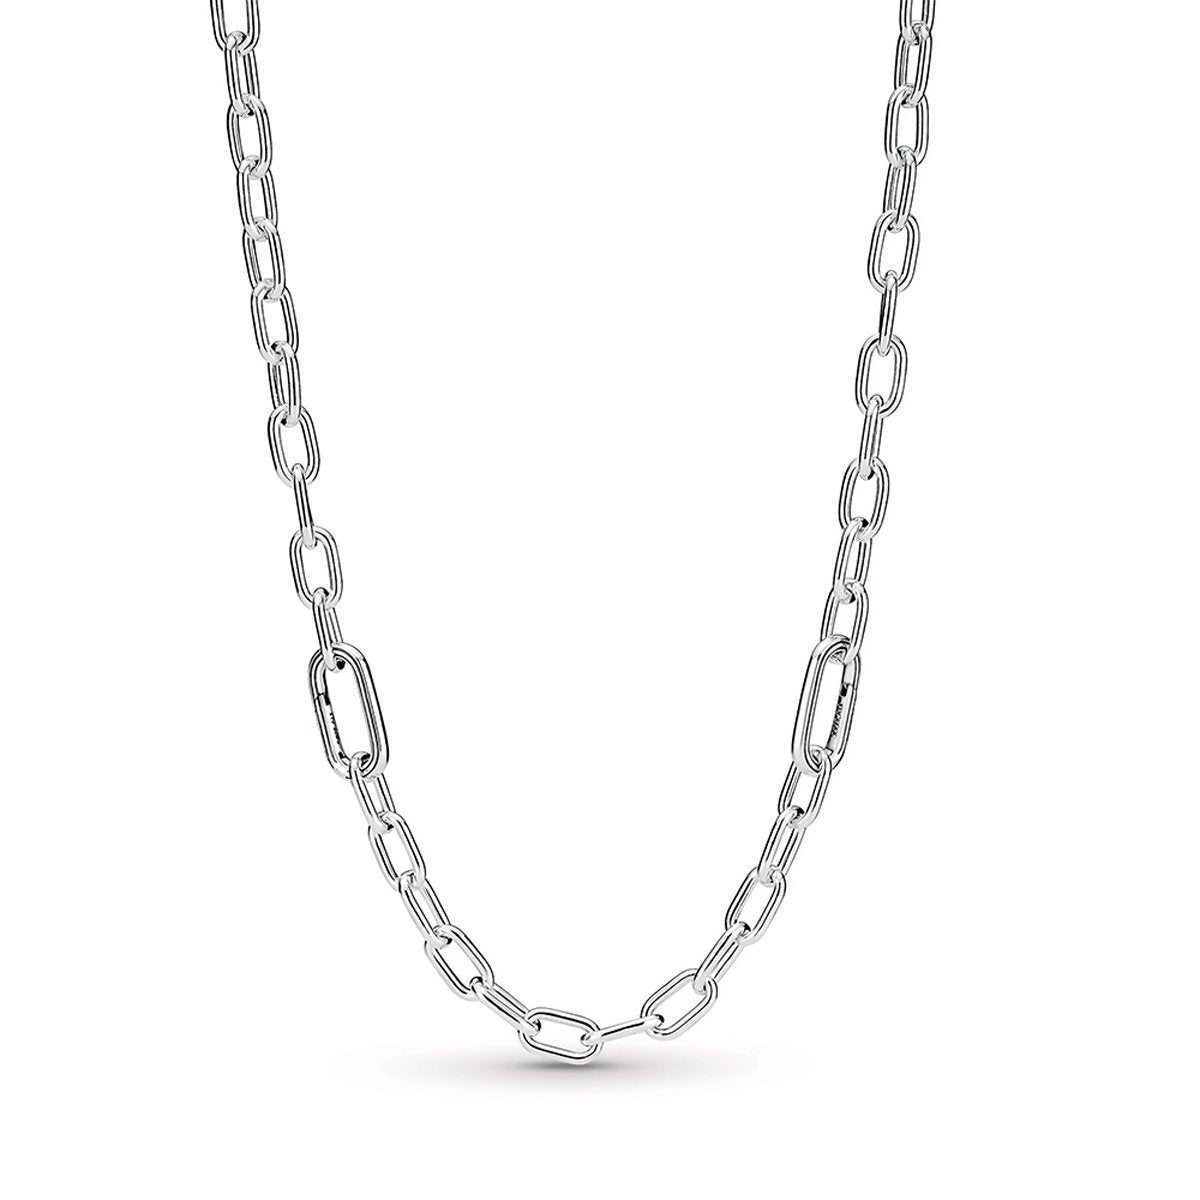 Pandora ME - Small Link Chain Necklace